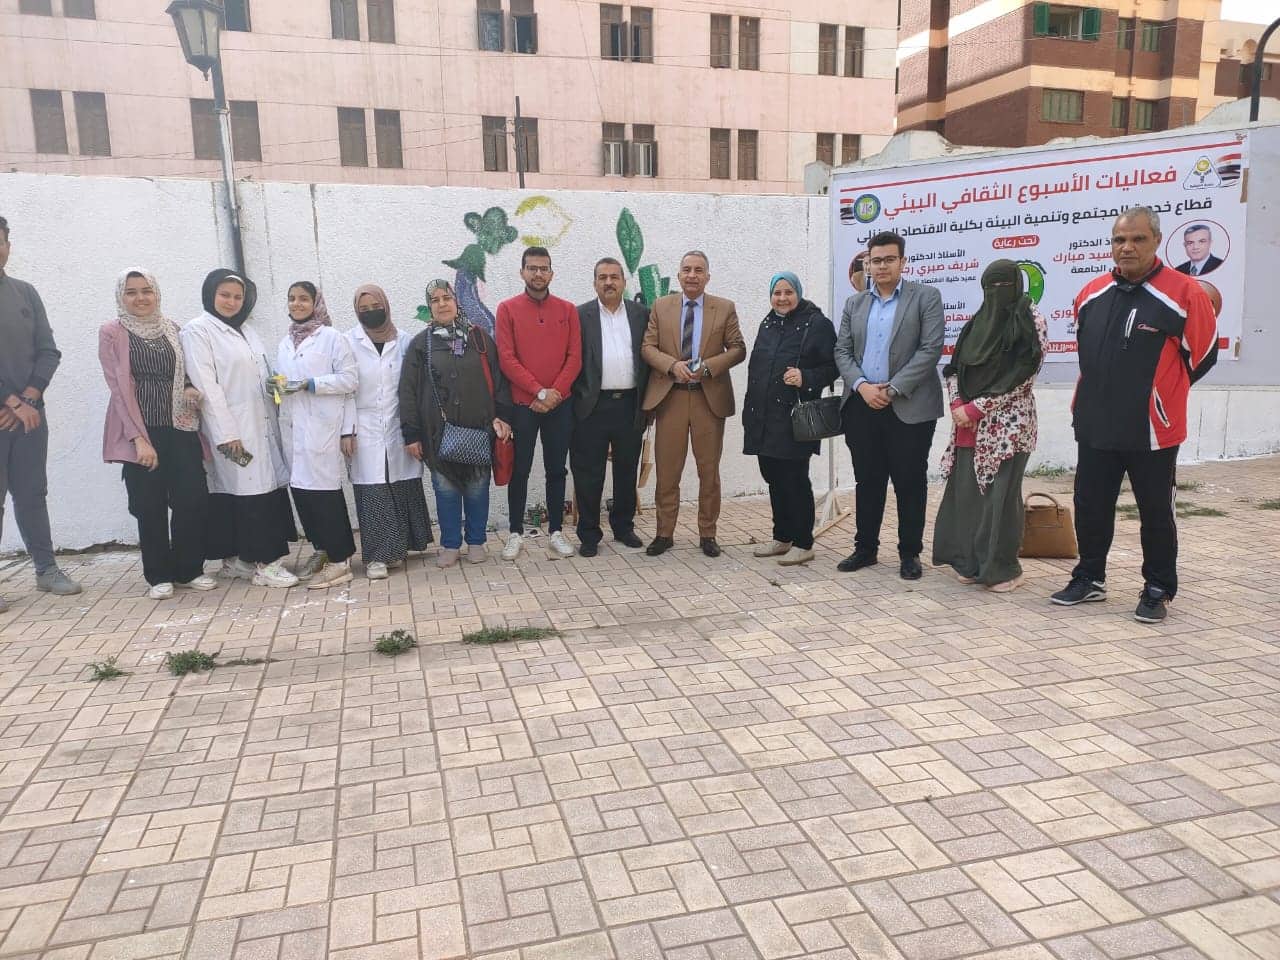 The conclusion of the activities of the Environmental Cultural Week with the Community Service and Environmental Development Sector at the Faculty of Home Economics, Menoufia University